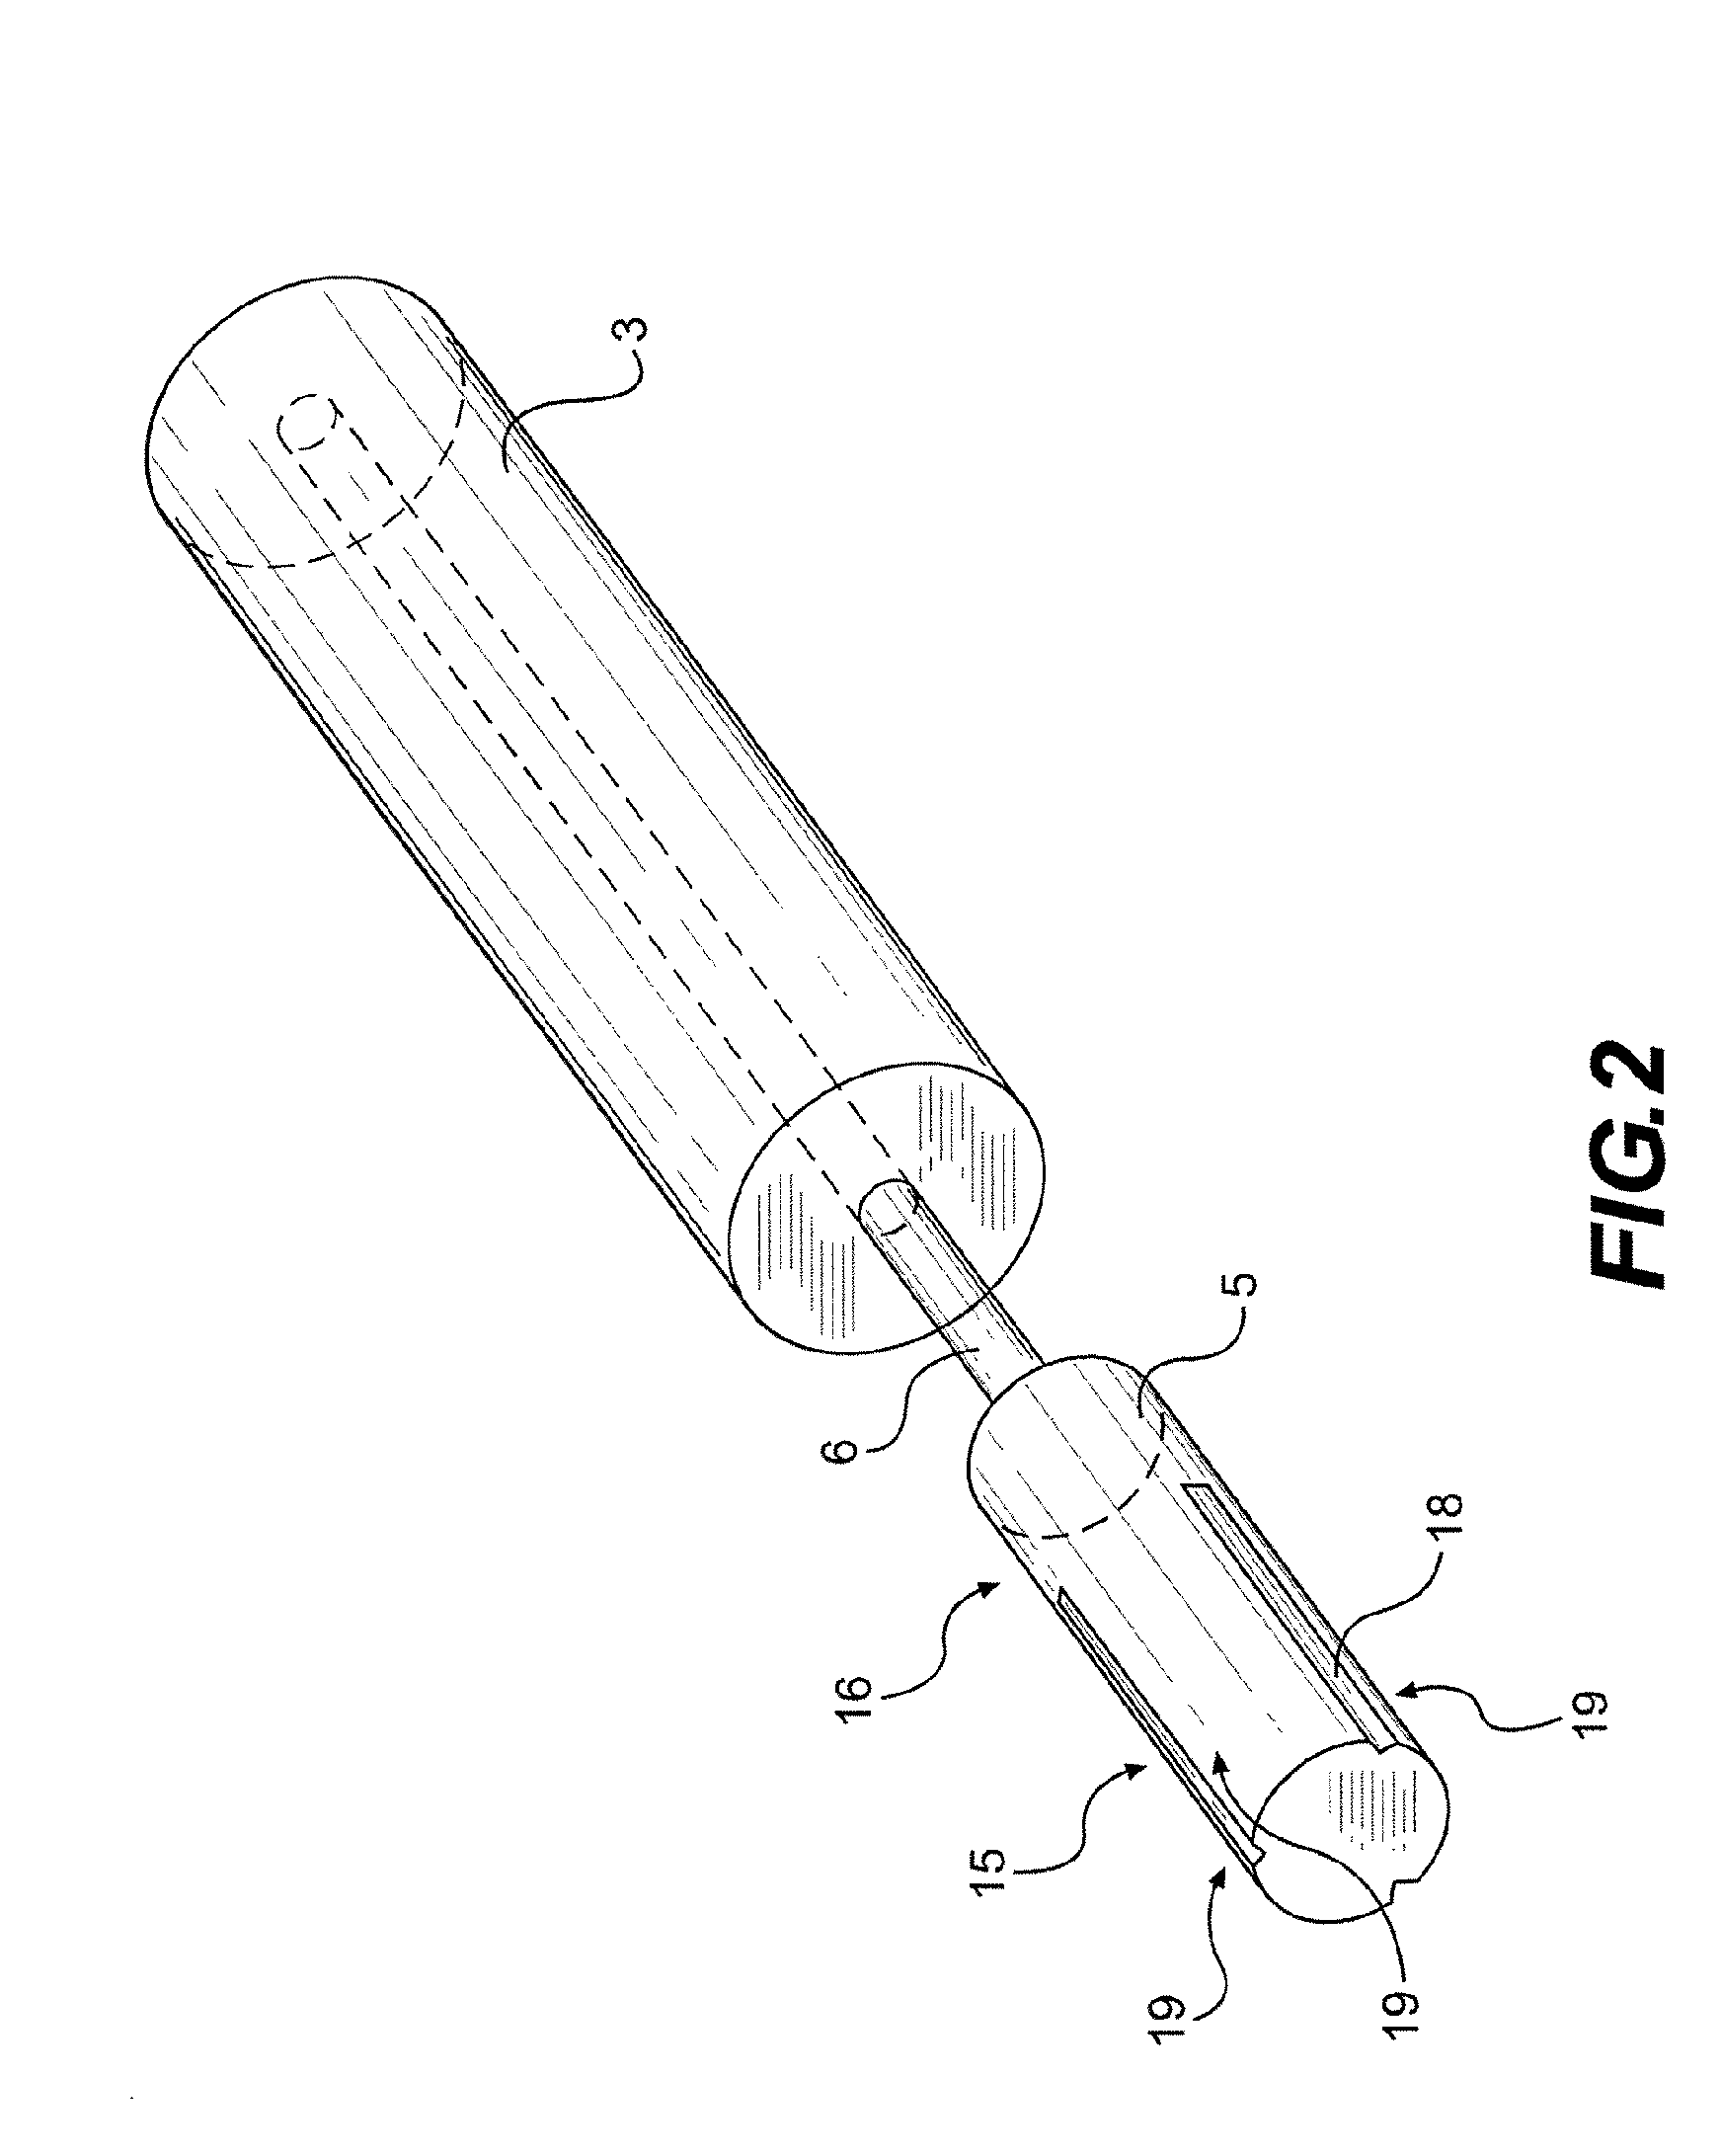 Lancet system with a sterile protector